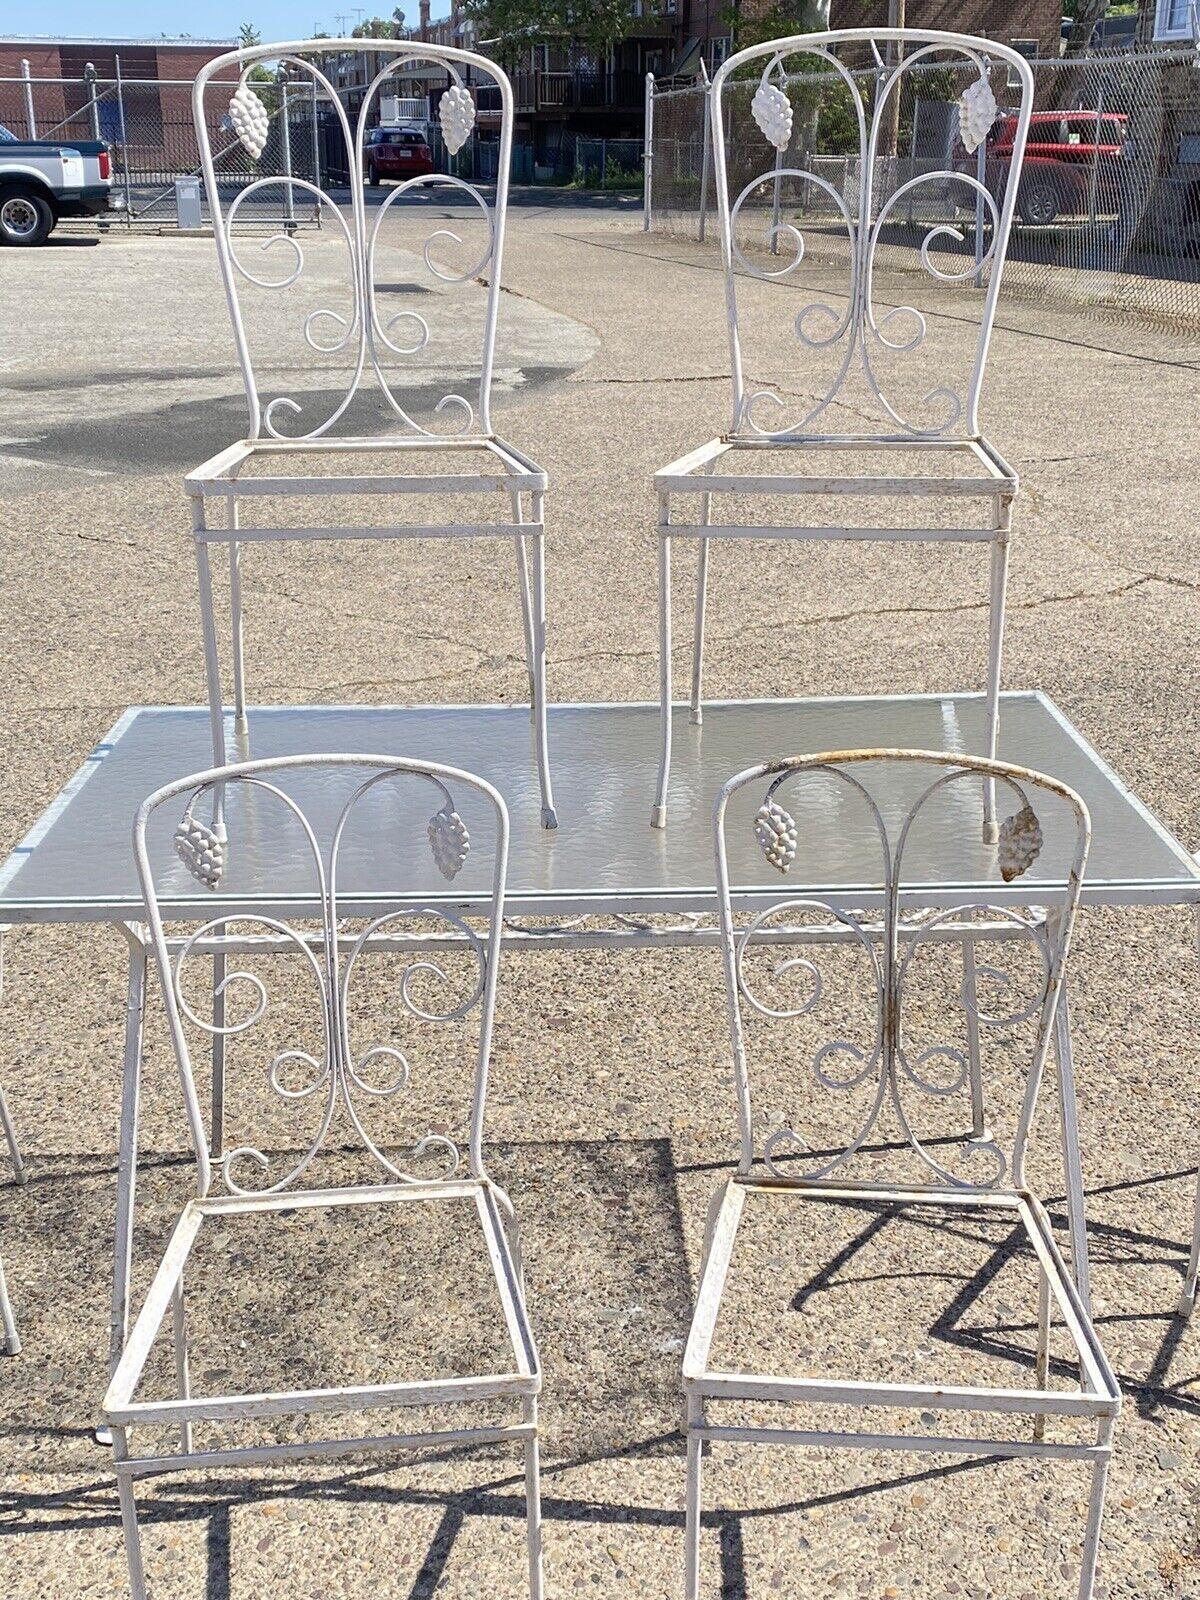 Vintage John Salterini Grape Cluster Wrought Iron Patio Garden Dining Set - 7 Pc Set. Item features a wrought iron scrolling frames with grape cluster design. Set includes (1) Rectangular dining table with glass top, (2) Arm chairs, (4) Side chairs,